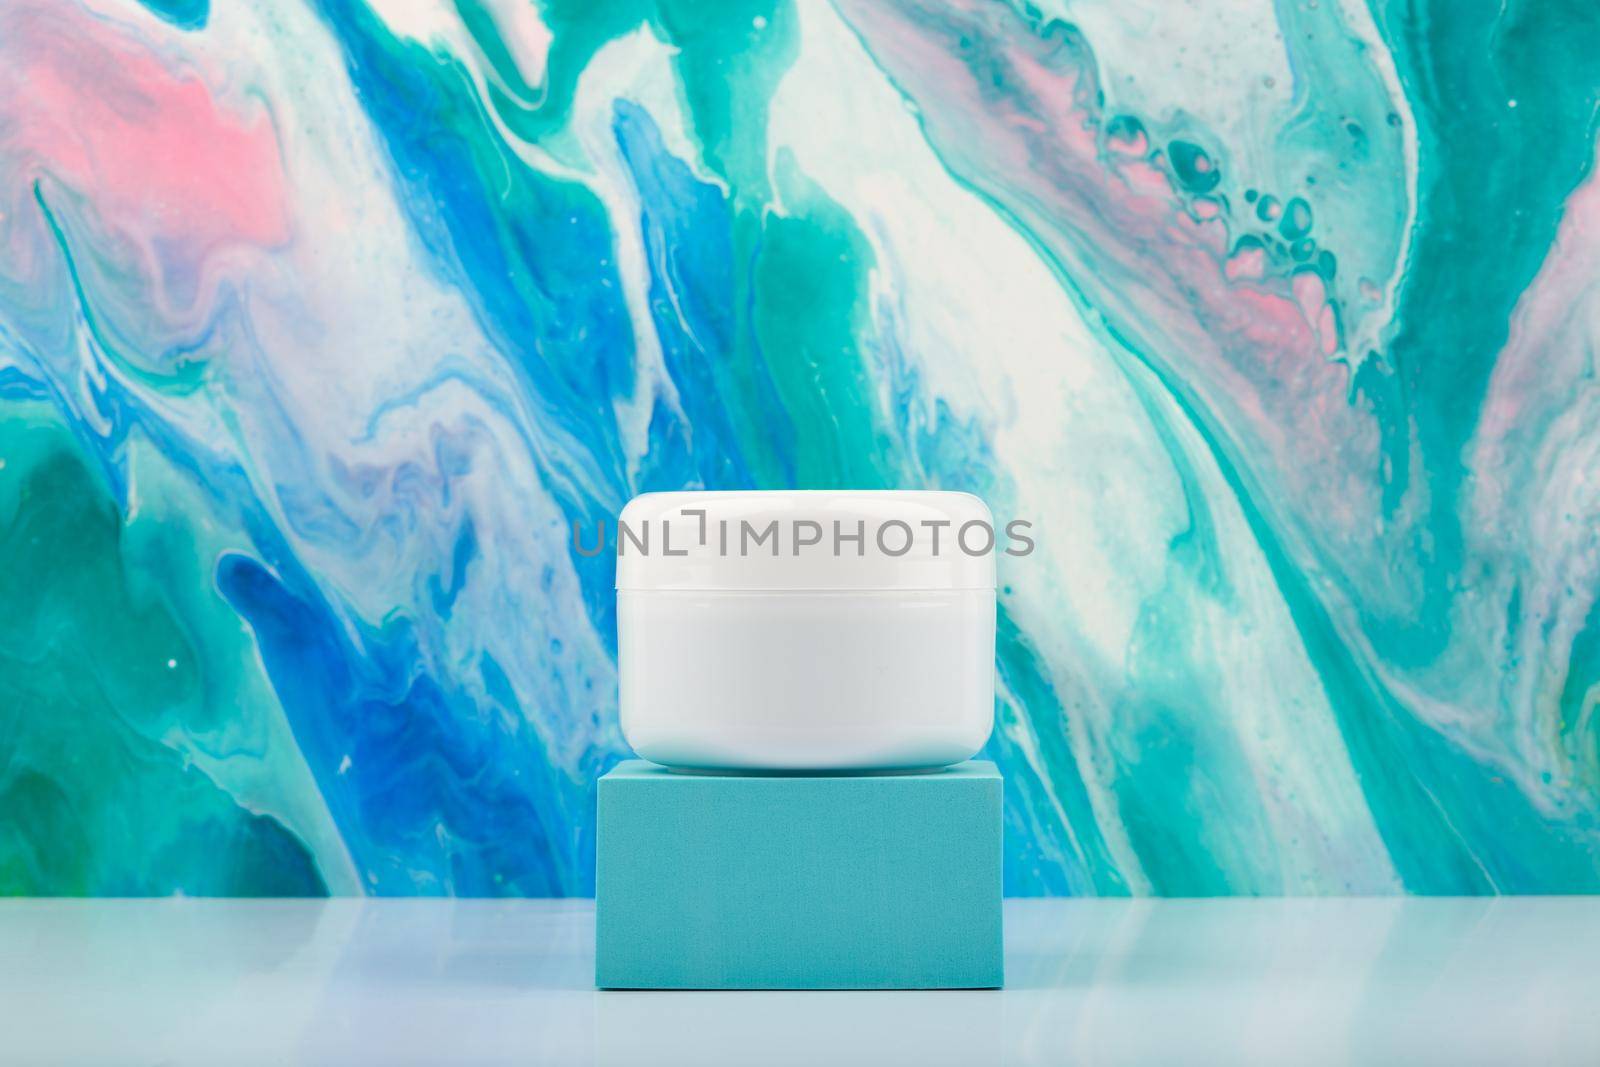 White cosmetic jar on blue podium against marbled background in blue colors with copy space by Senorina_Irina